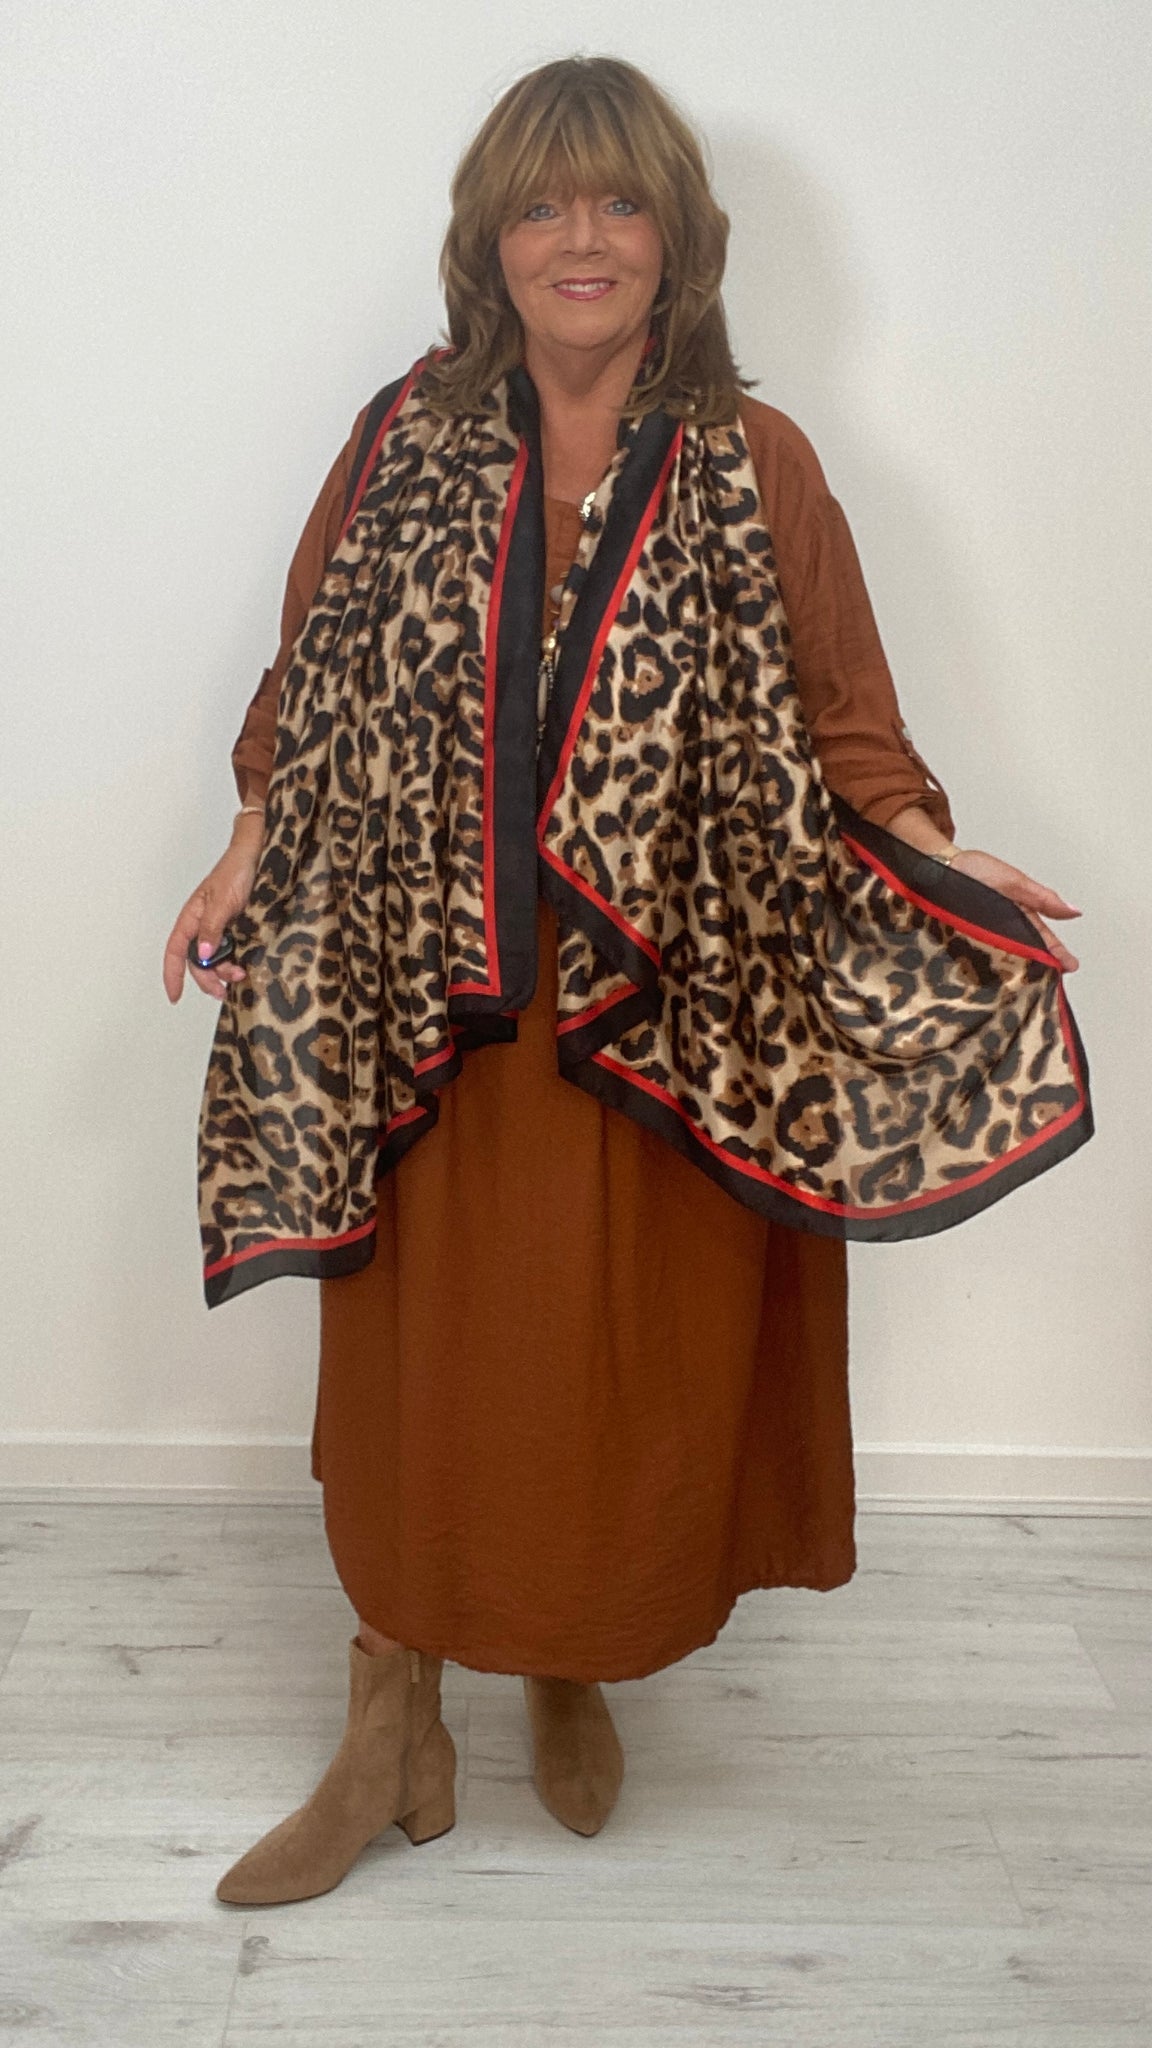 Leopard Print Silky Scarf with Black/Red Border